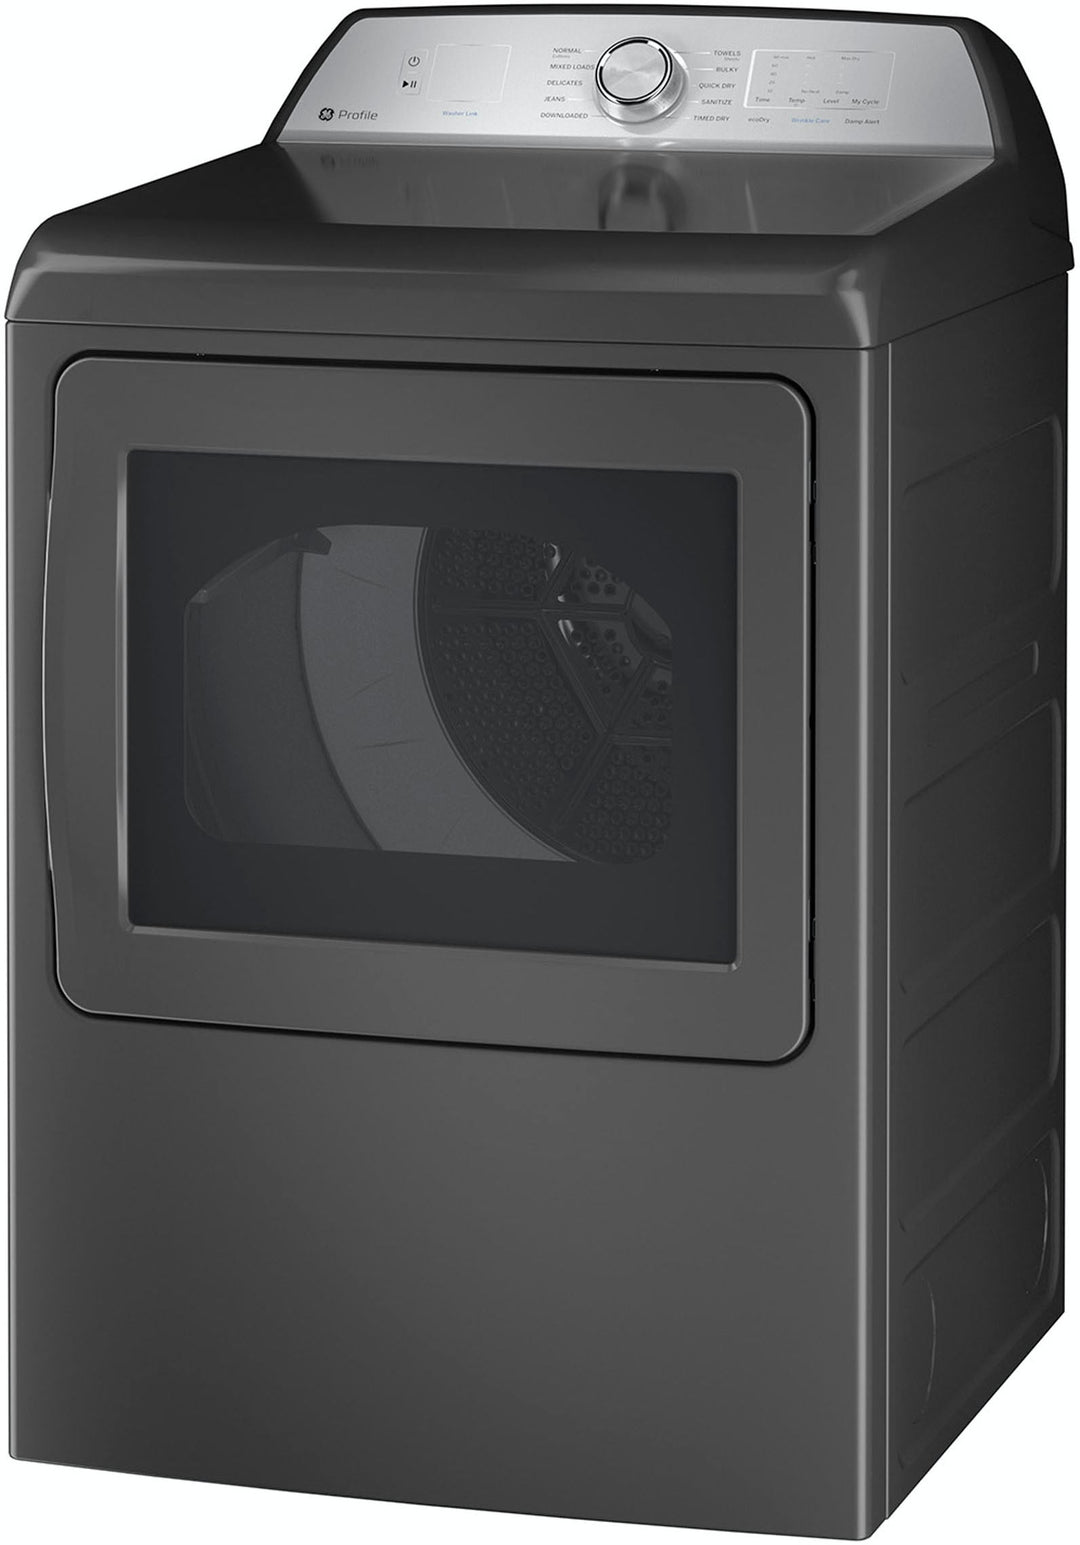 GE Profile - 7.4 Cu. Ft. Smart Electric Dryer with Sanitize Cycle and Sensor Dry - Diamond gray_5